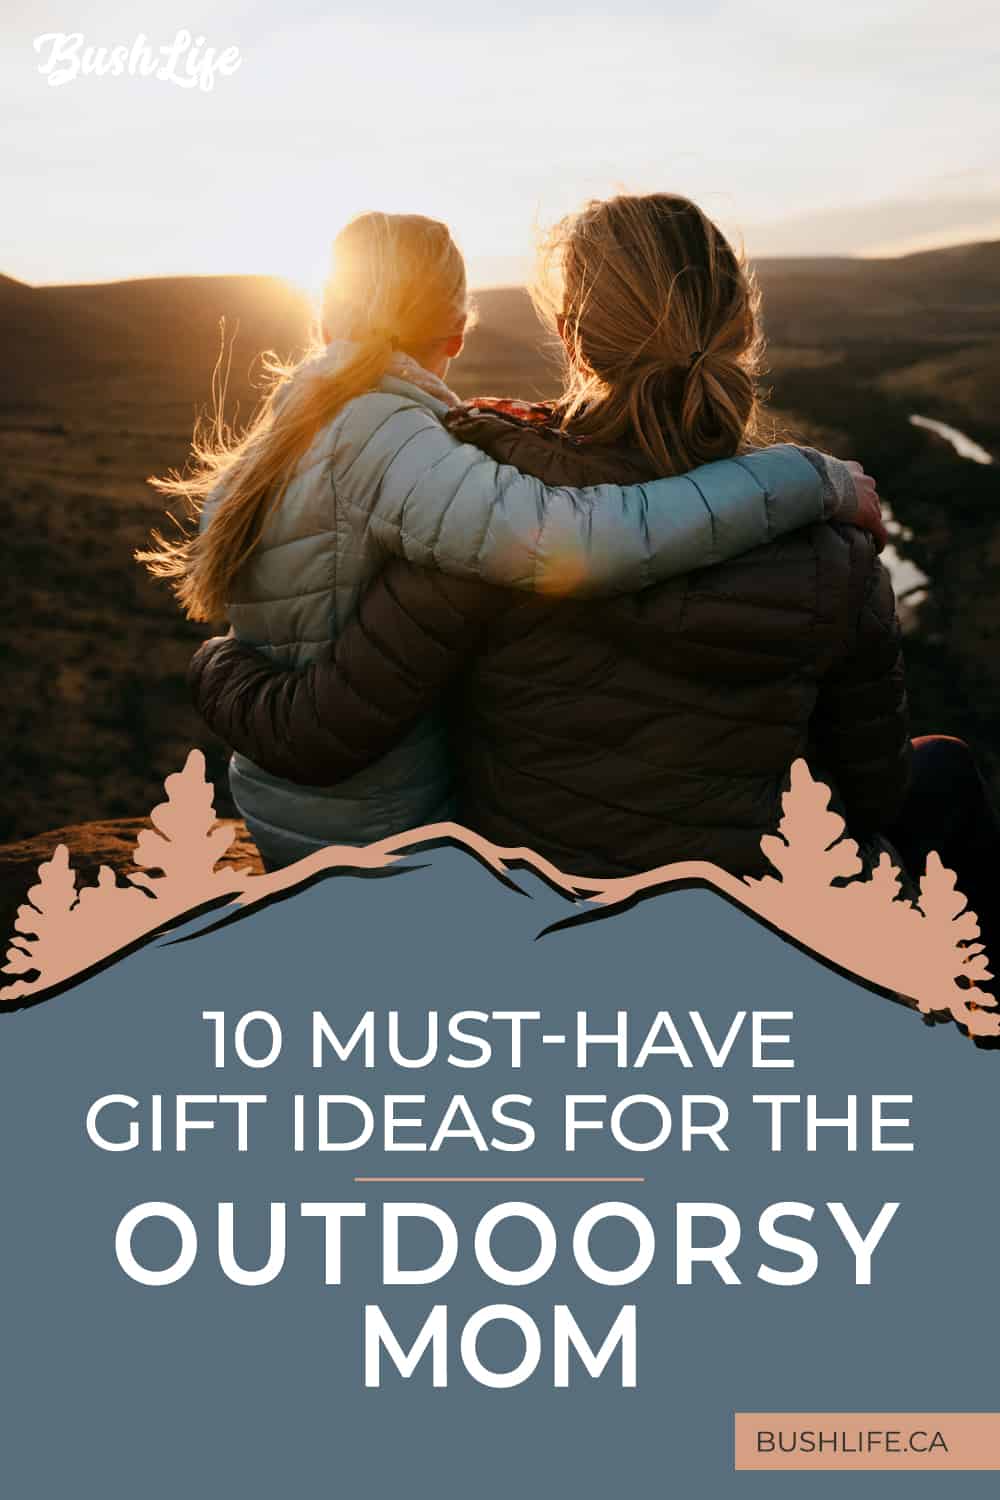 10 Must-Have Gift Ideas for the Outdoorsy Mom